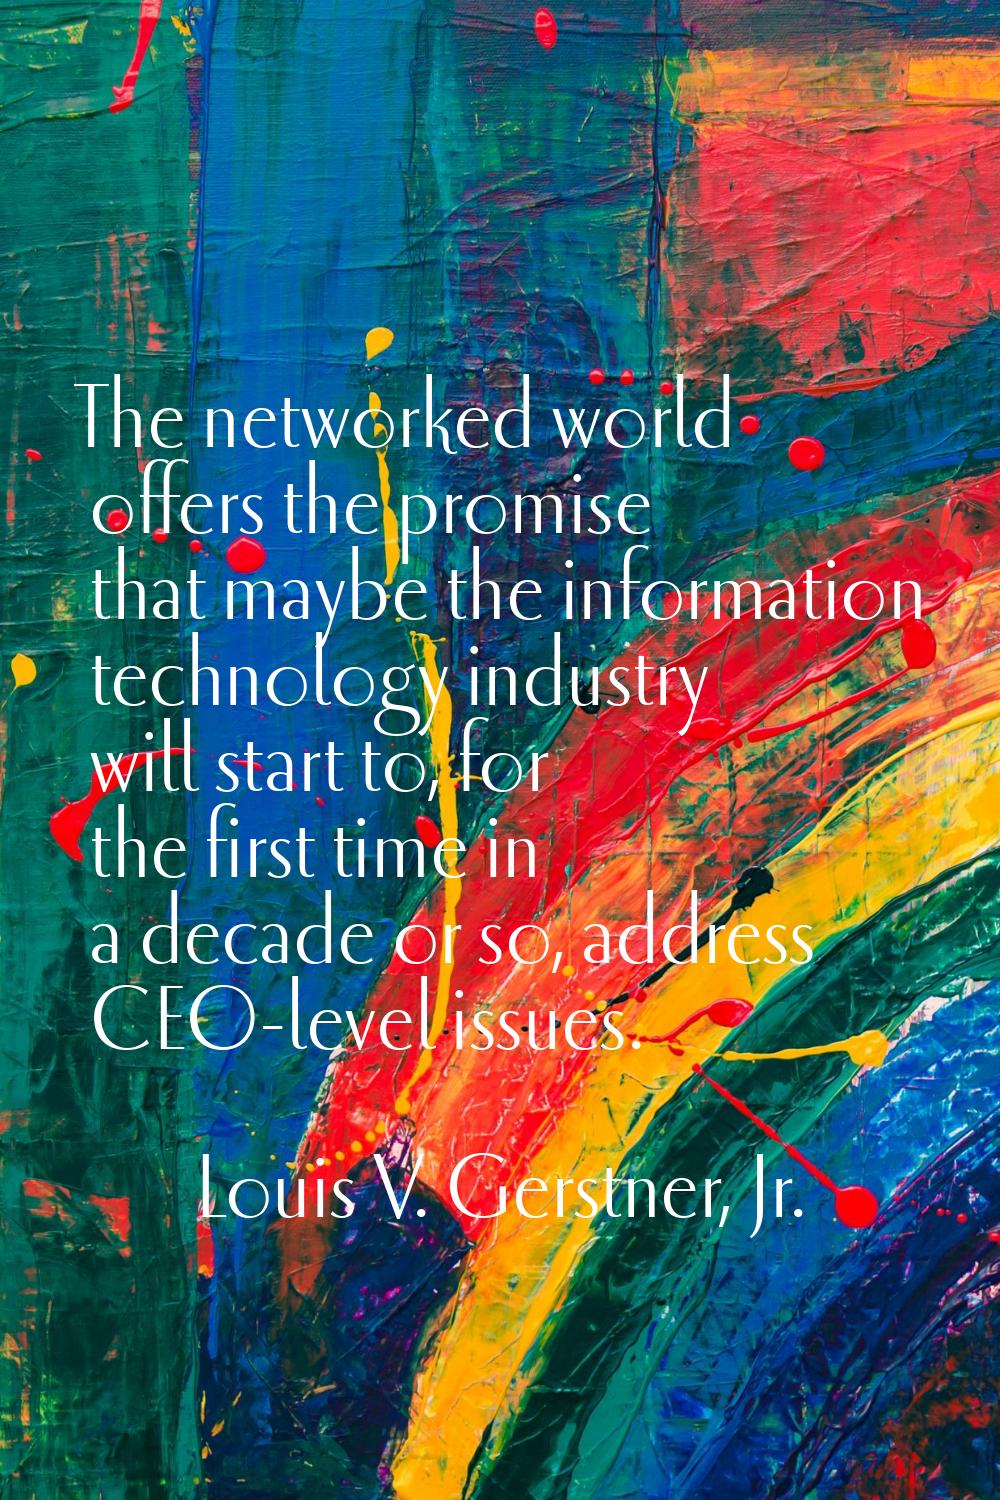 The networked world offers the promise that maybe the information technology industry will start to